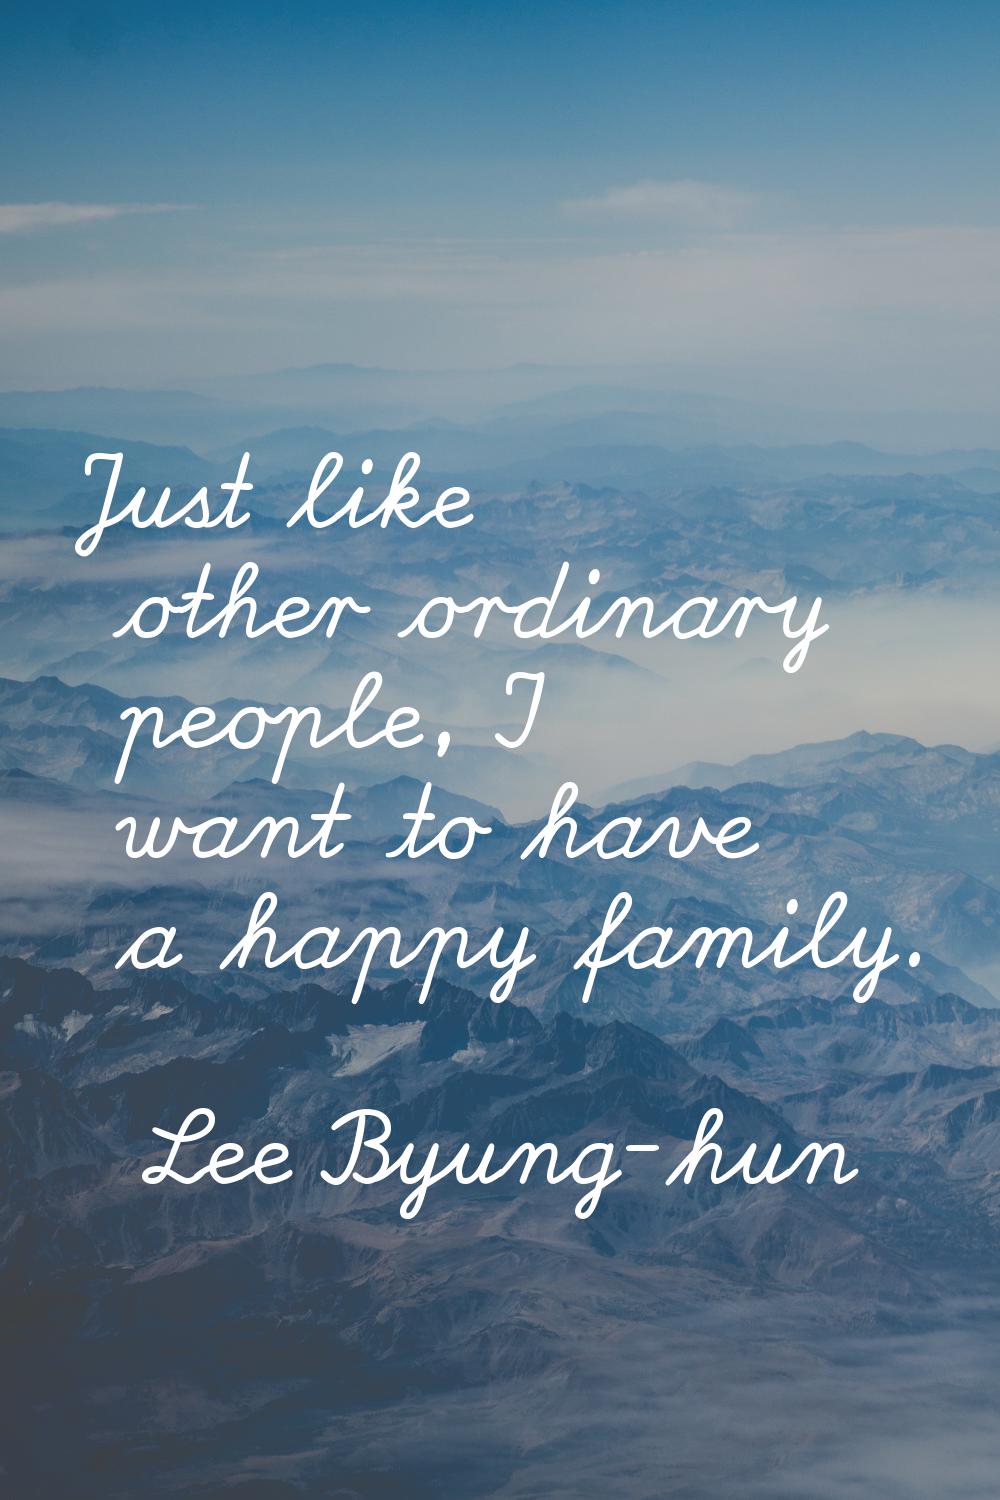 Just like other ordinary people, I want to have a happy family.